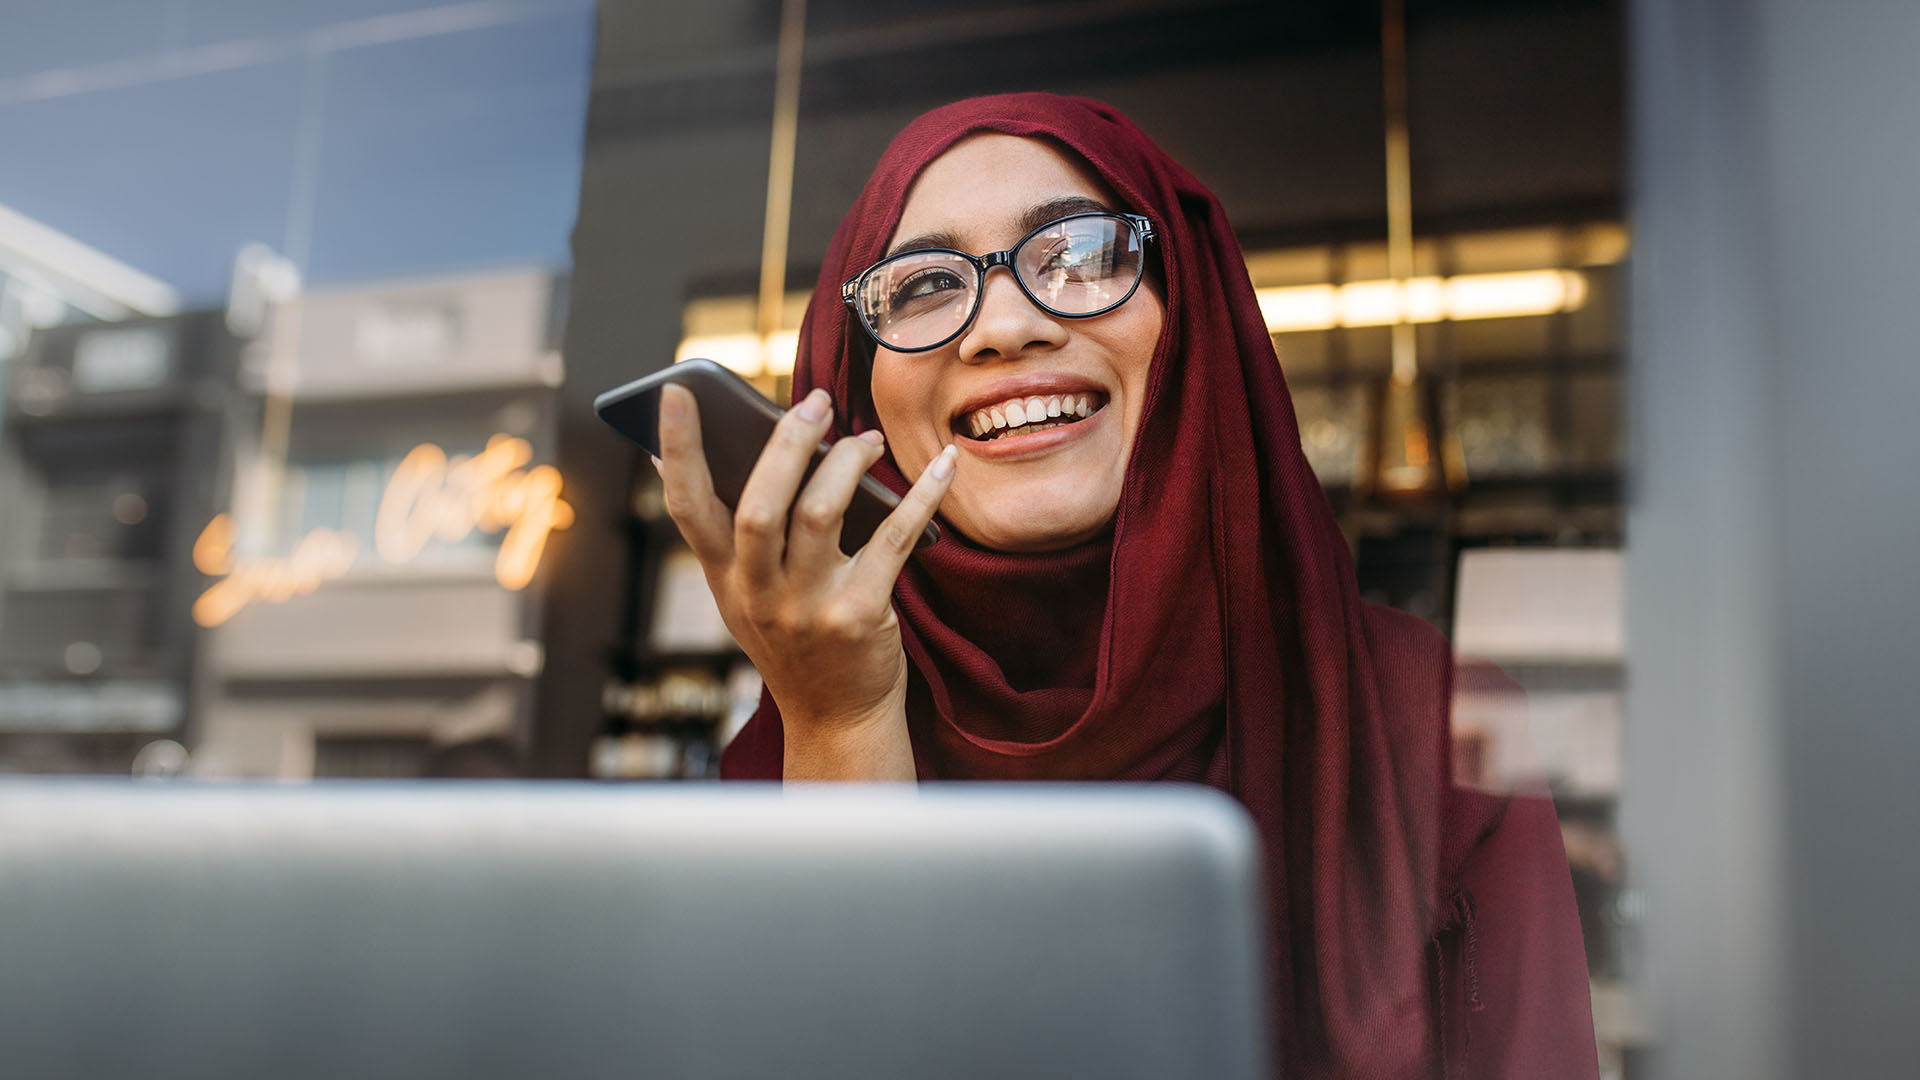 A UC student wearing glasses and smiling in a dark red hijab holding a smartphone